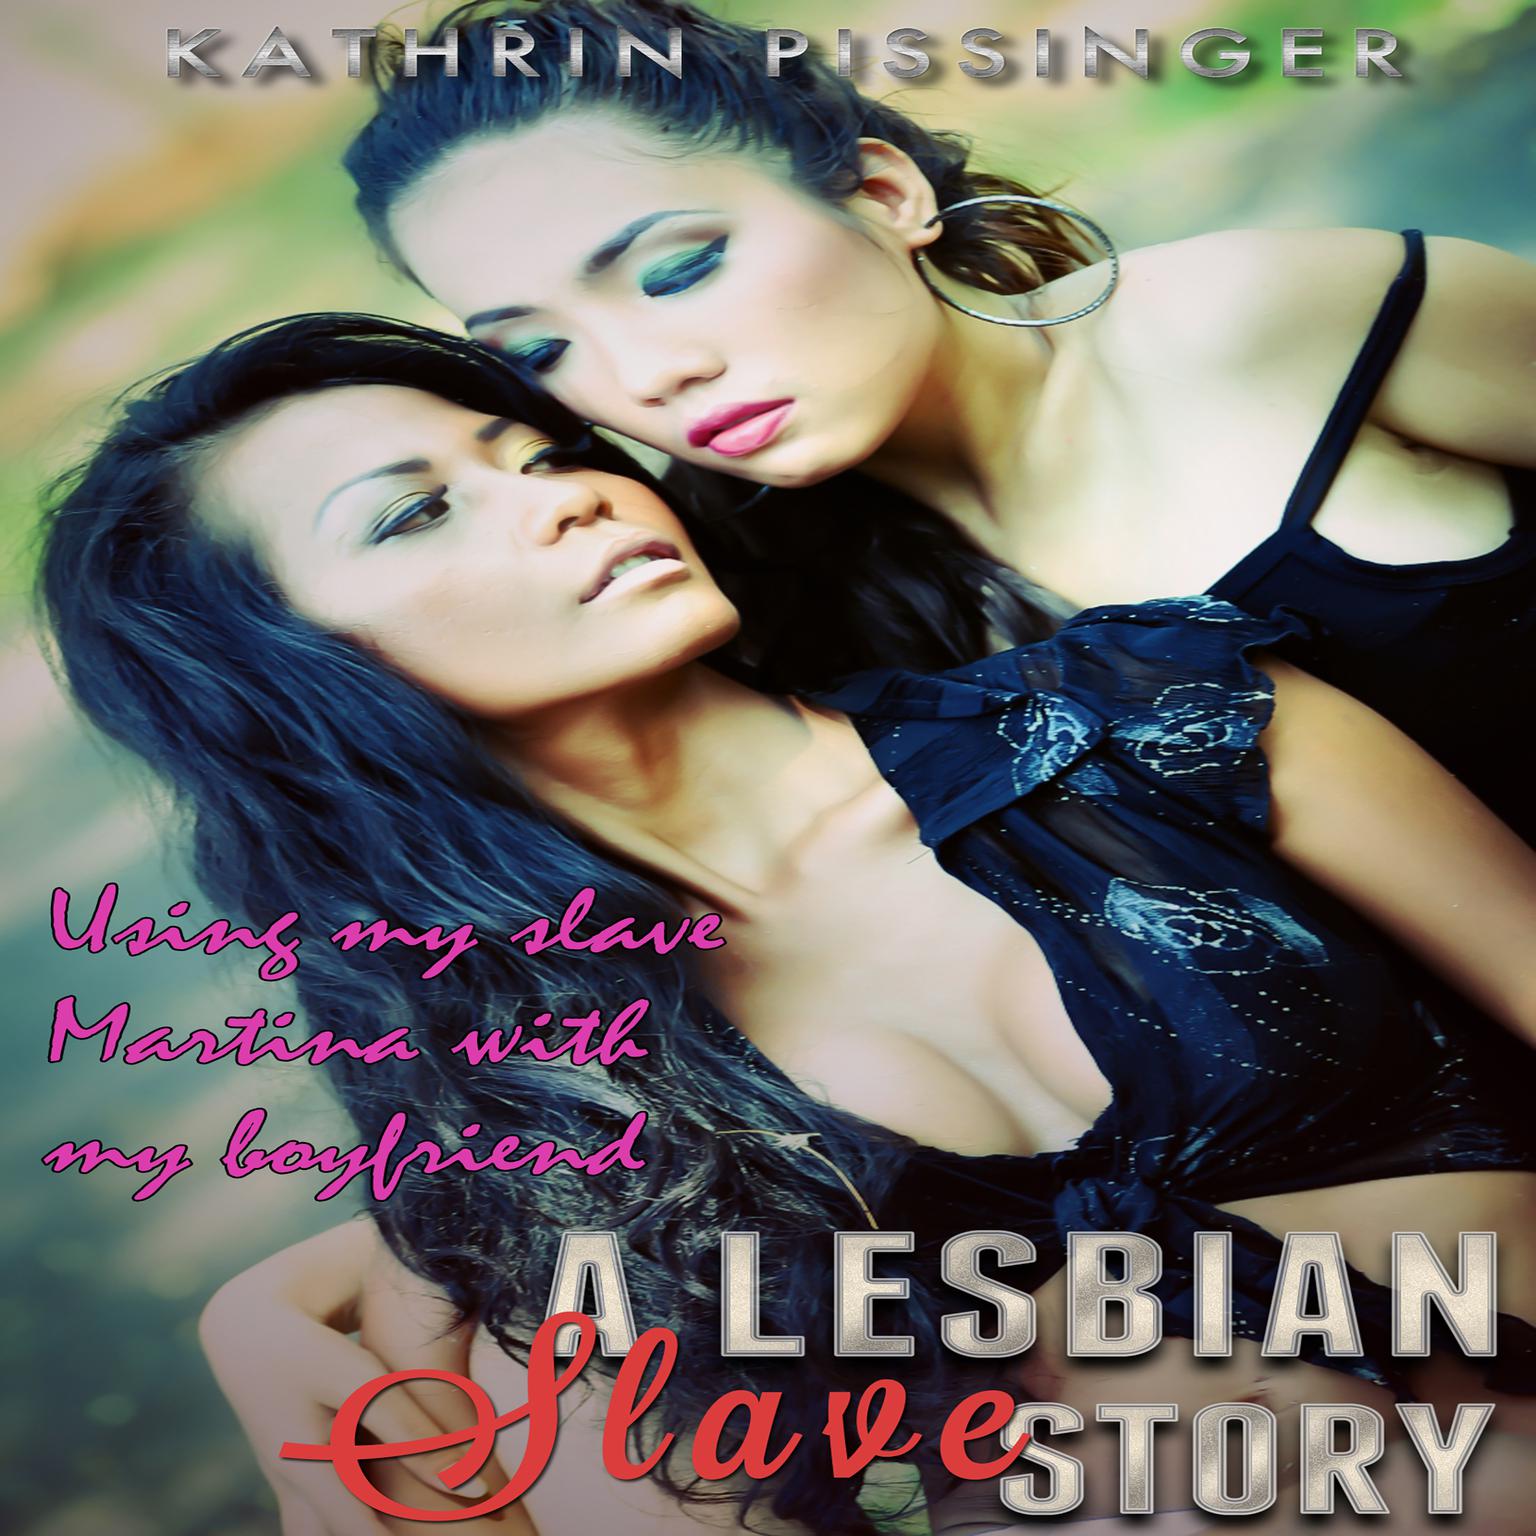 Using my slave Martina with my boyfriend Audiobook, by Kathrin Pissinger